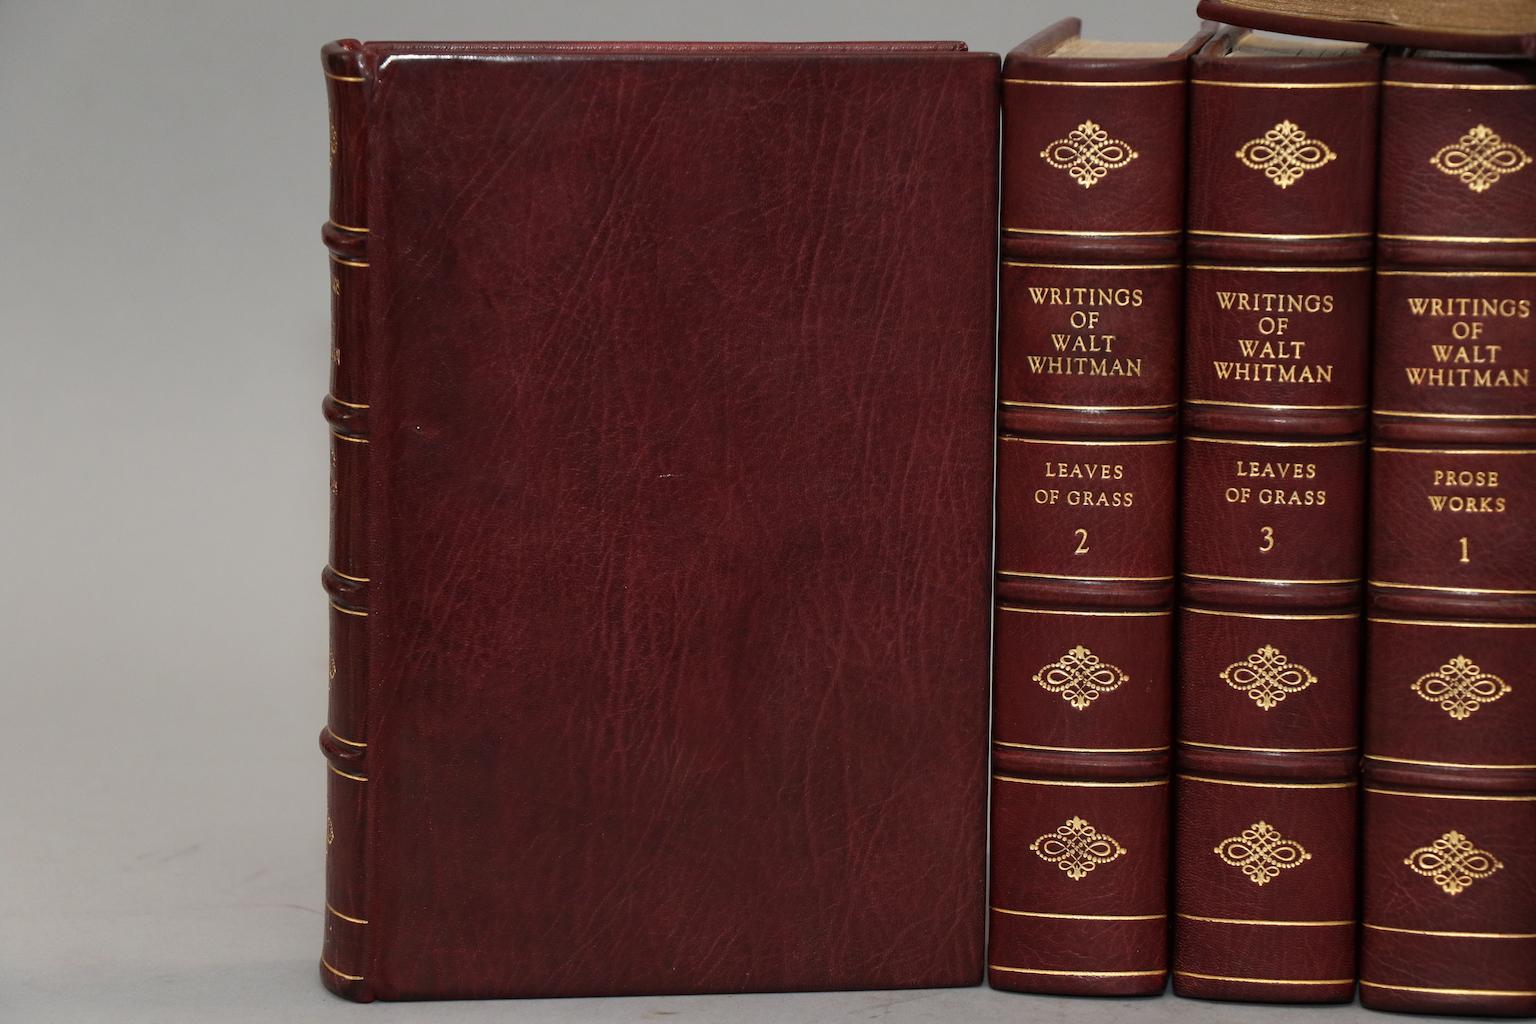 Leatherbound. 10 volumes. Limited to 300 sets, this is #27. Skillfully rebound in full wine Morocco with top edges gilt, raised bands, and gilt panels. Very good. Published in New York by G.P. Putnam's Sons in 1902.